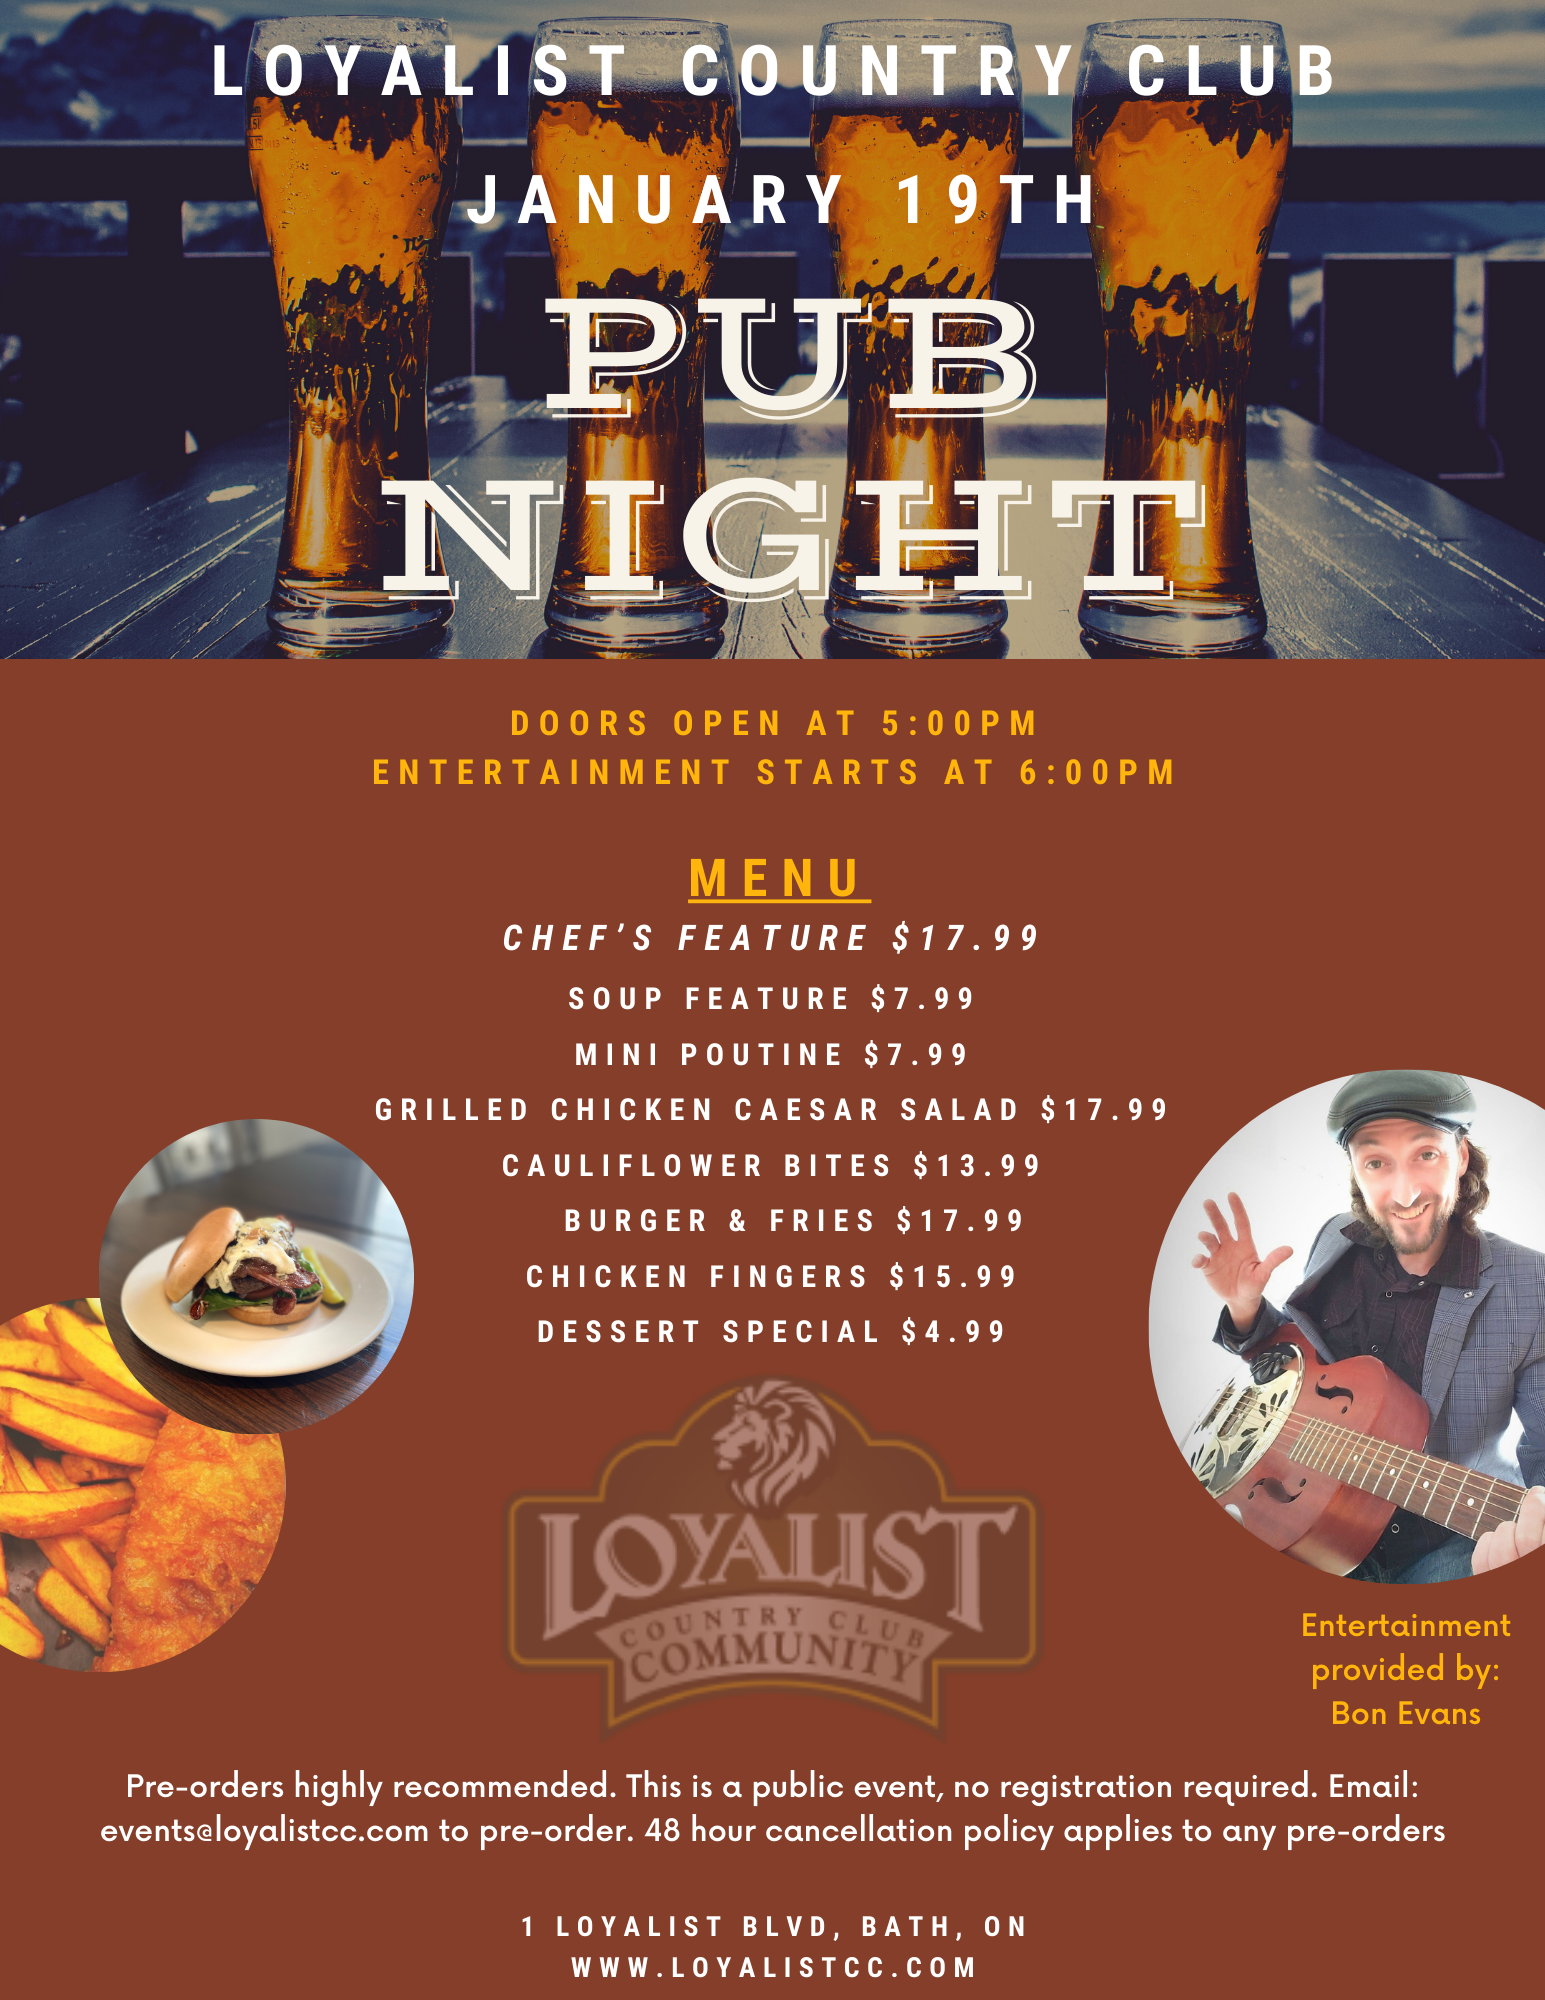 Pub Night at LCC. Entertainment provided by Bon Evans. Doors open at 5:00pm